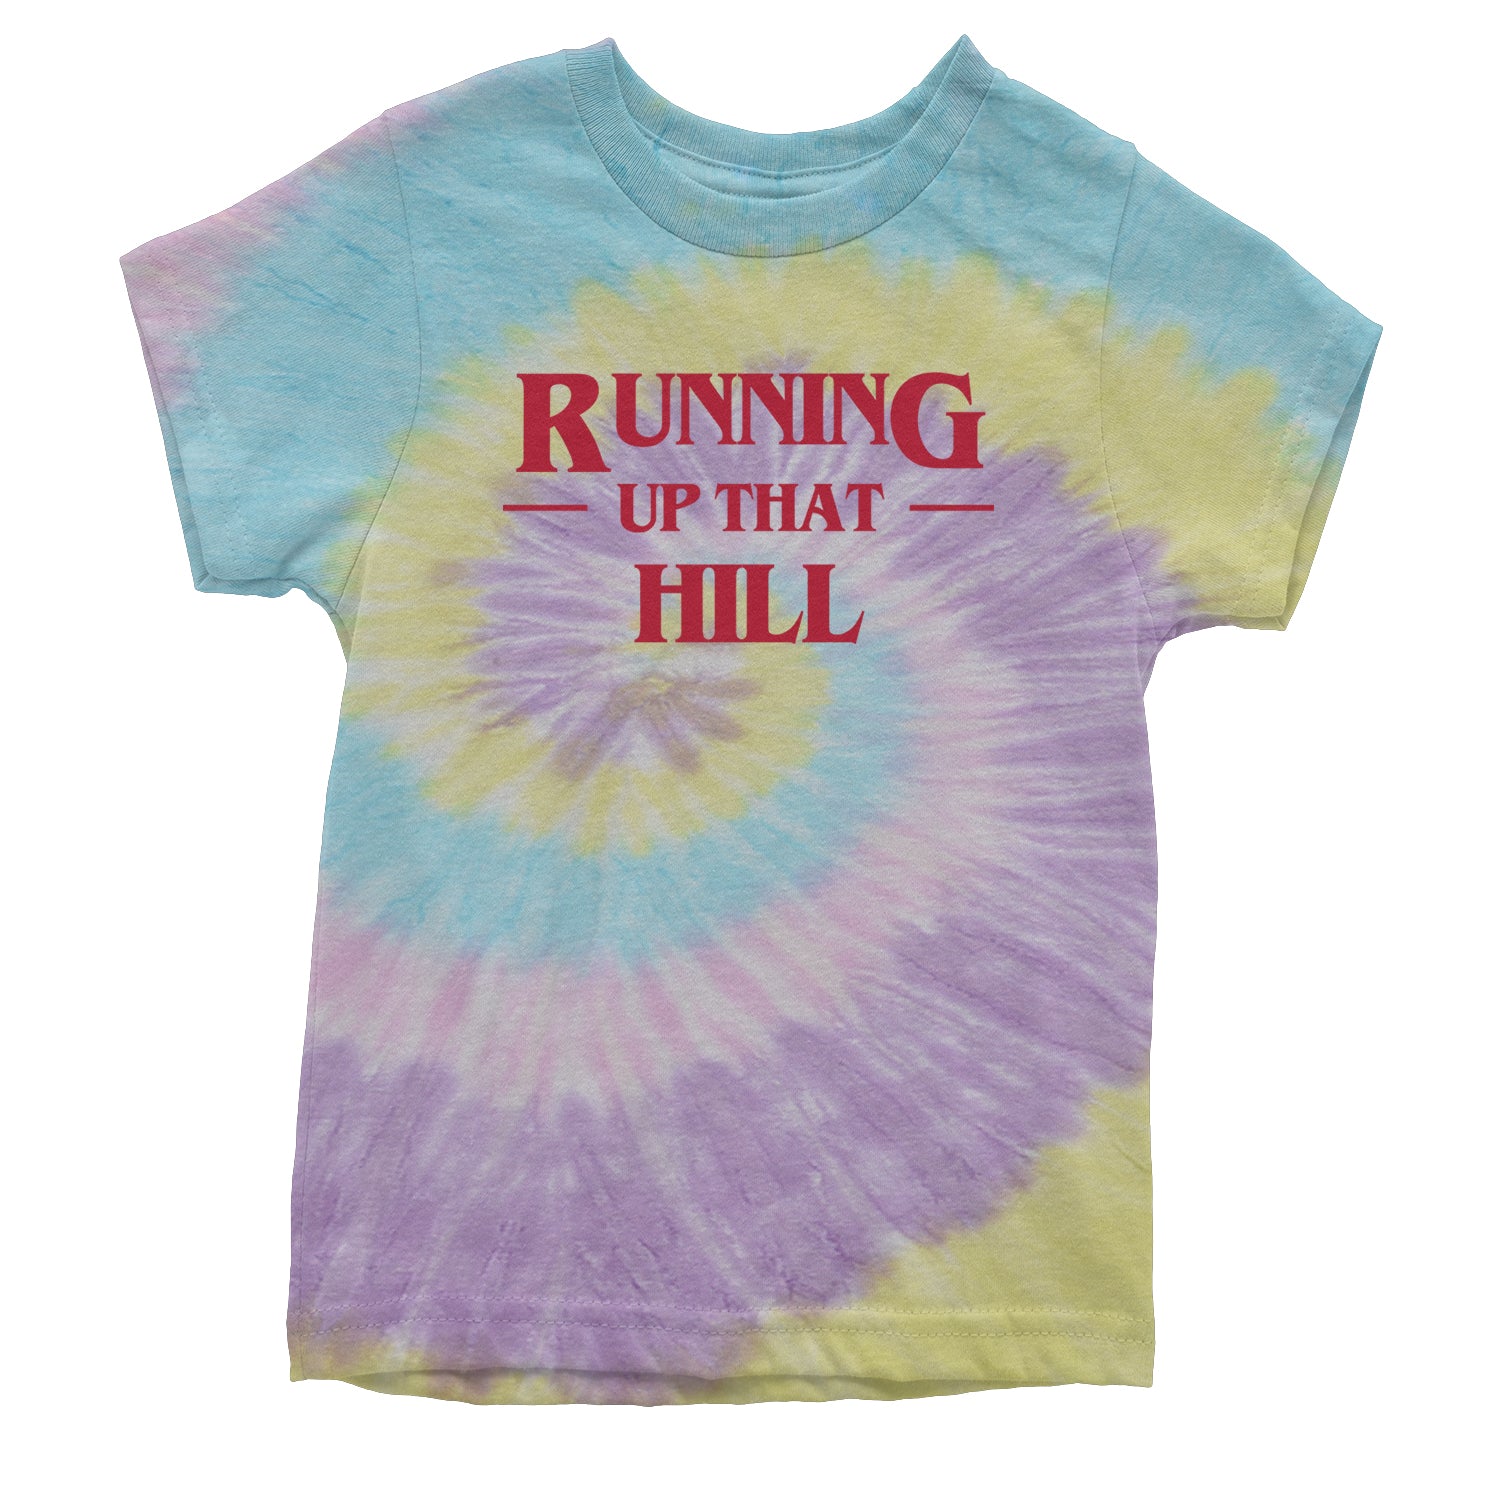 Running Up That Hill Youth T-shirt 4, don’t, eleven, four, friends, lie, season by Expression Tees